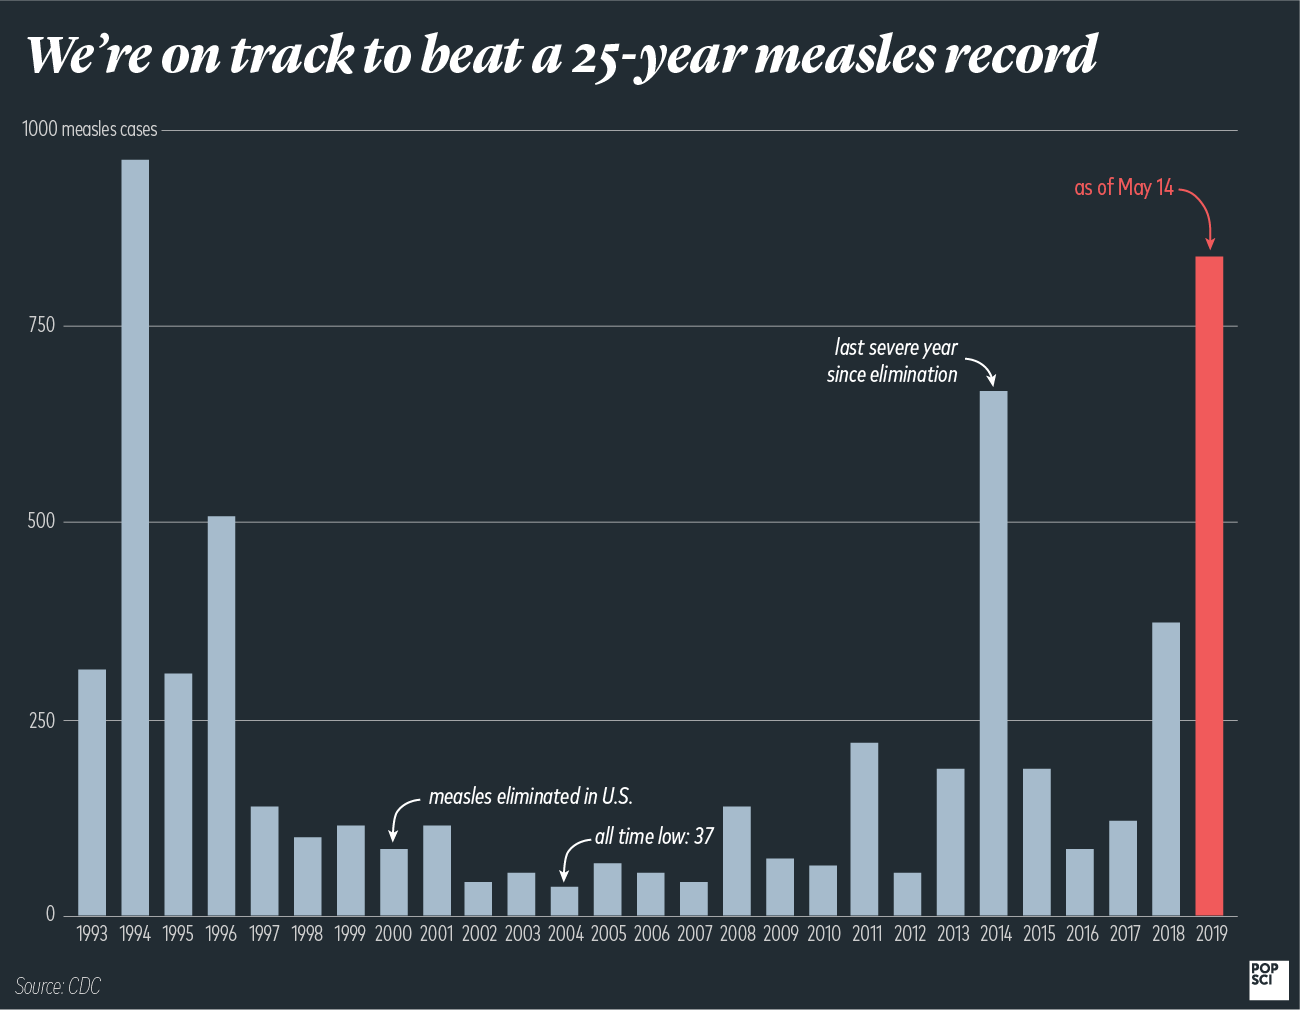 We’re barreling toward a 25-year measles record